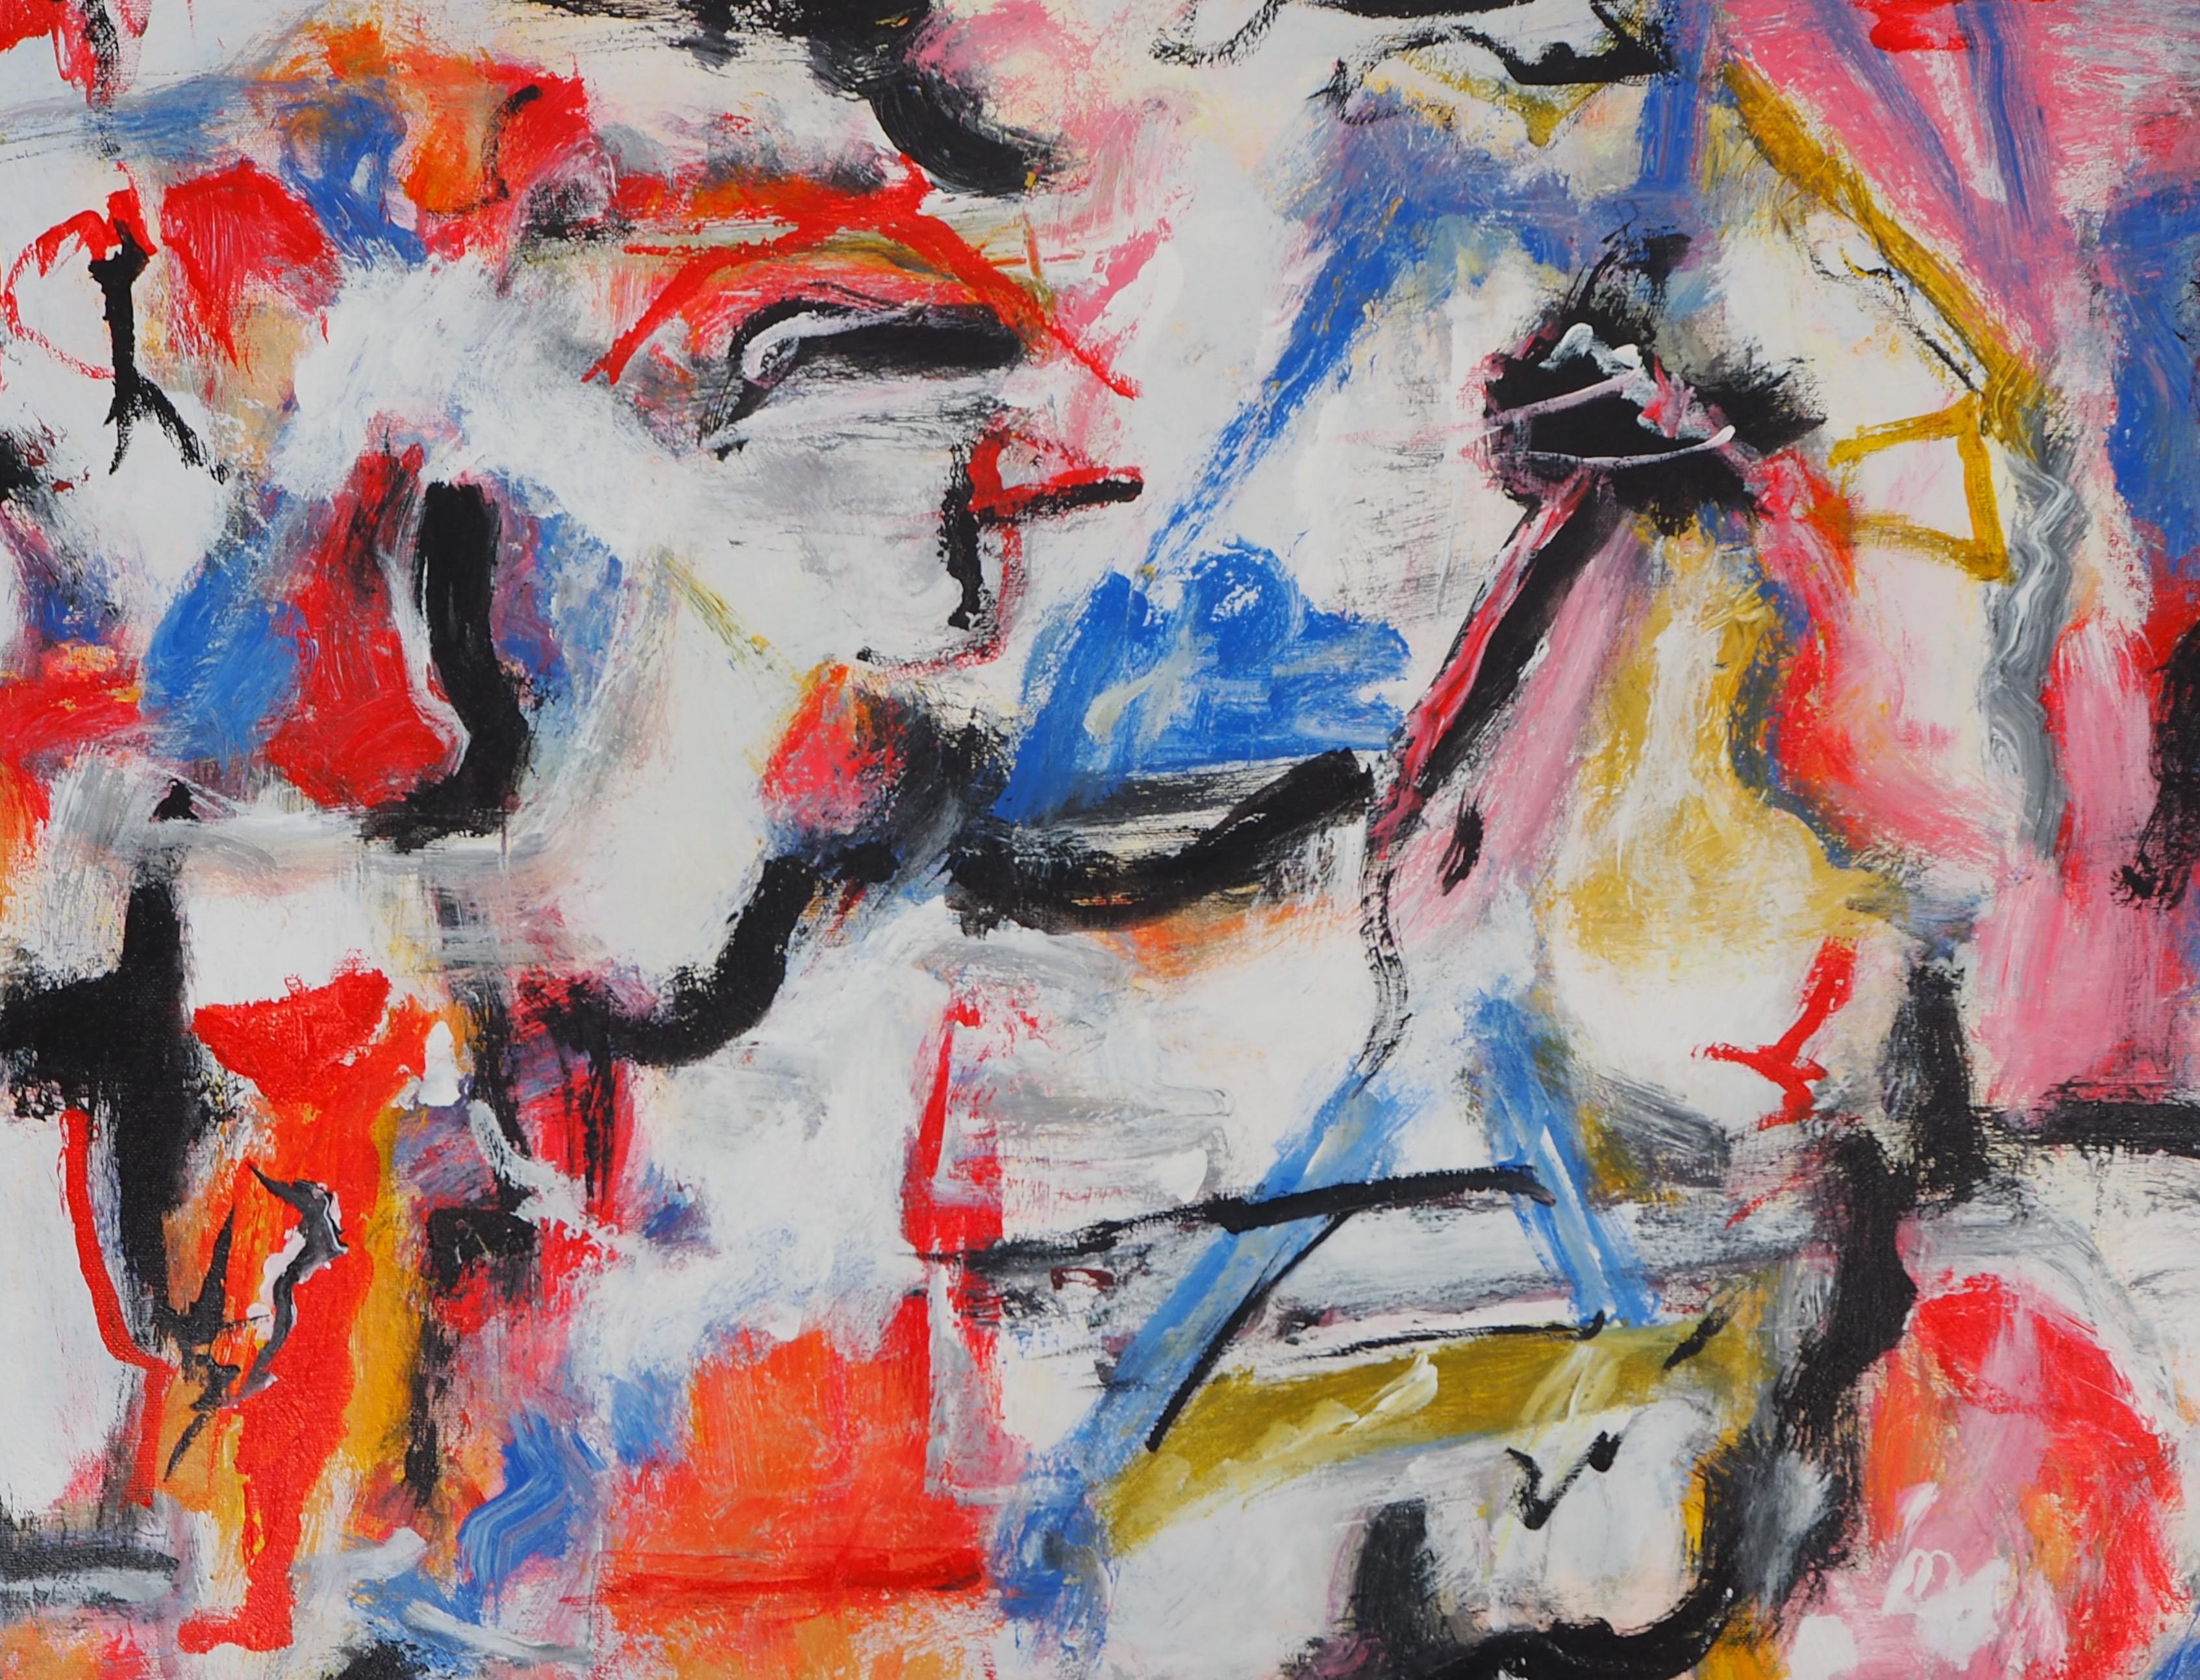 Untitled 1975 - Original Oil on Canvas, Signed - Painting by Willem de Kooning